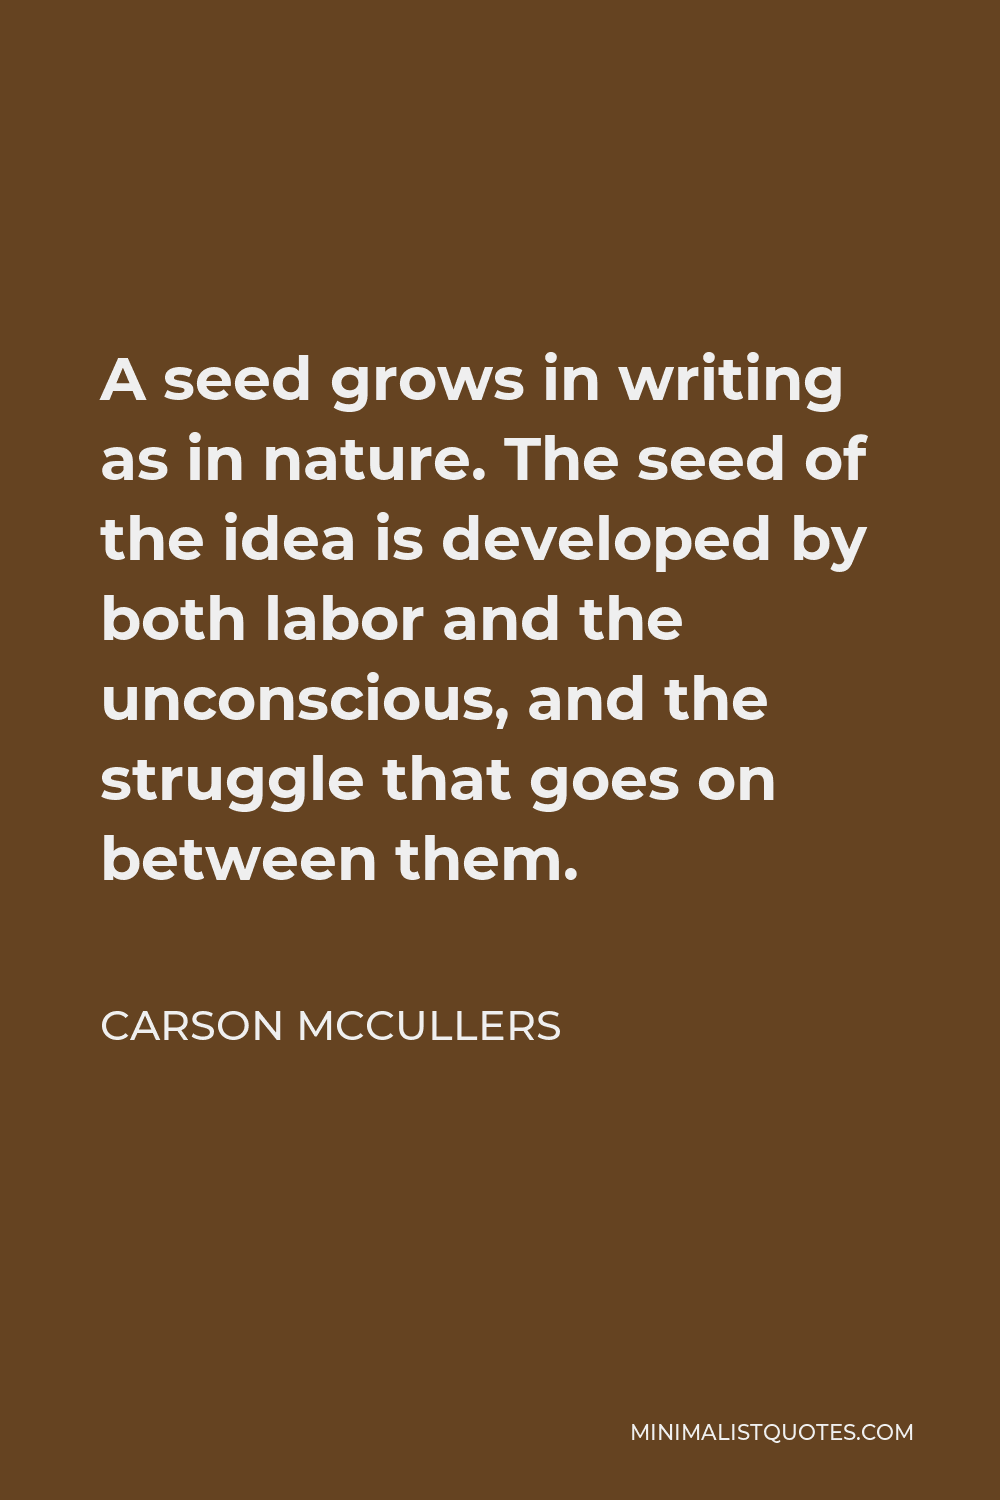 Carson McCullers Quote - A seed grows in writing as in nature. The seed of the idea is developed by both labor and the unconscious, and the struggle that goes on between them.